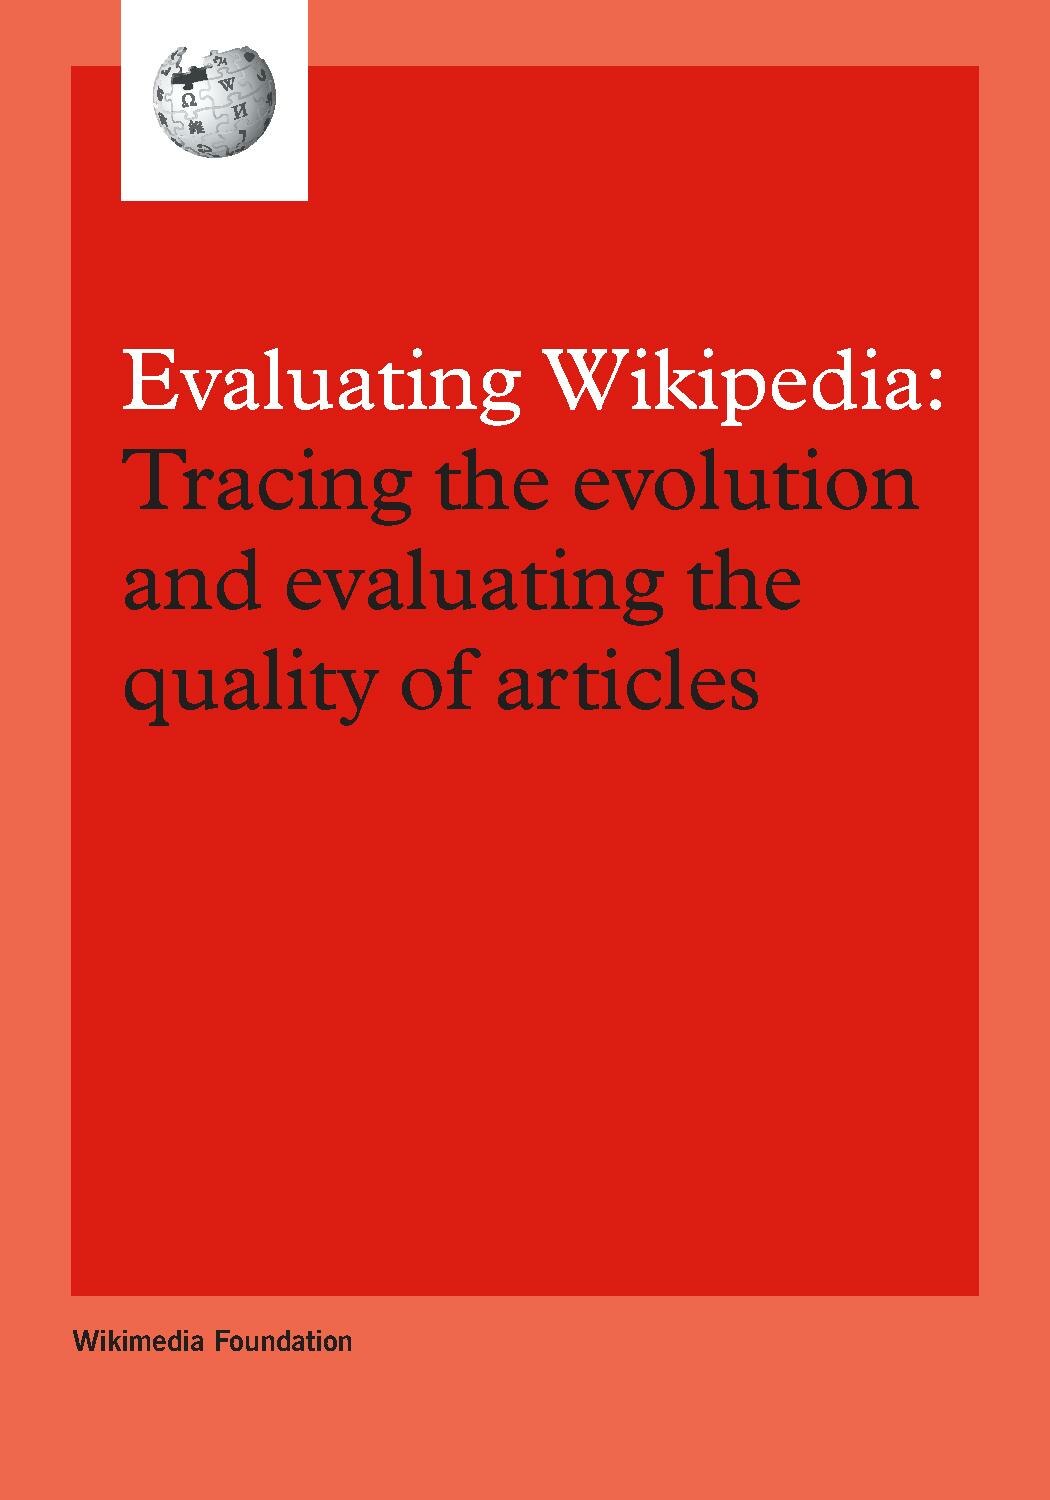 A brochure in PDF form by the Wikimedia Foundation about how articles evolve, elements of good quality articles, and signs of poor quality articles.